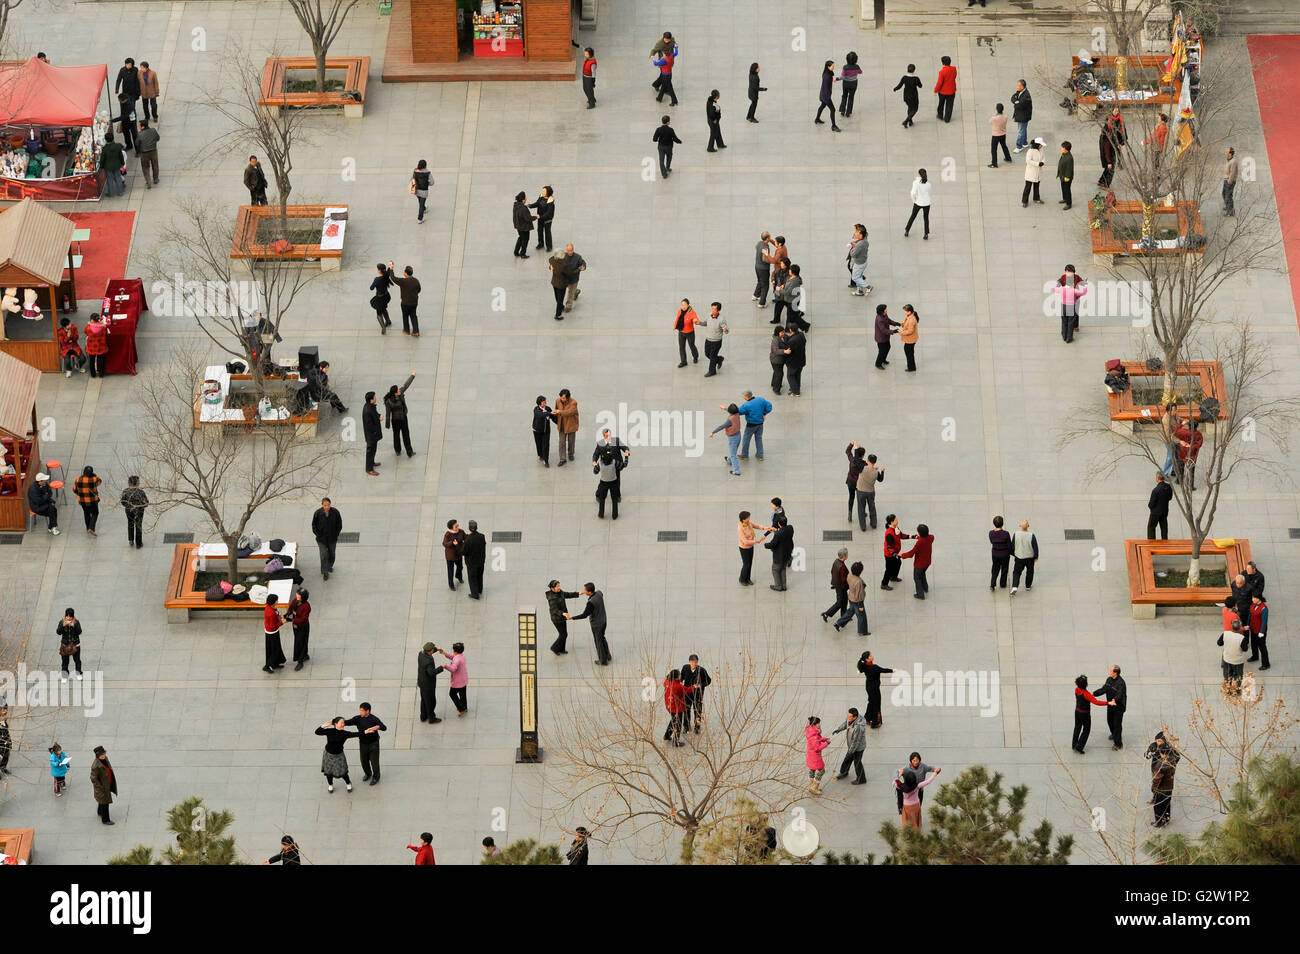 CHINA, Province Shaanxi, city Xian, people dance in the morning at square near wild goose pagoda / Menschen tanzen morgens auf dem Platz an der Wildgans Pagode Stock Photo